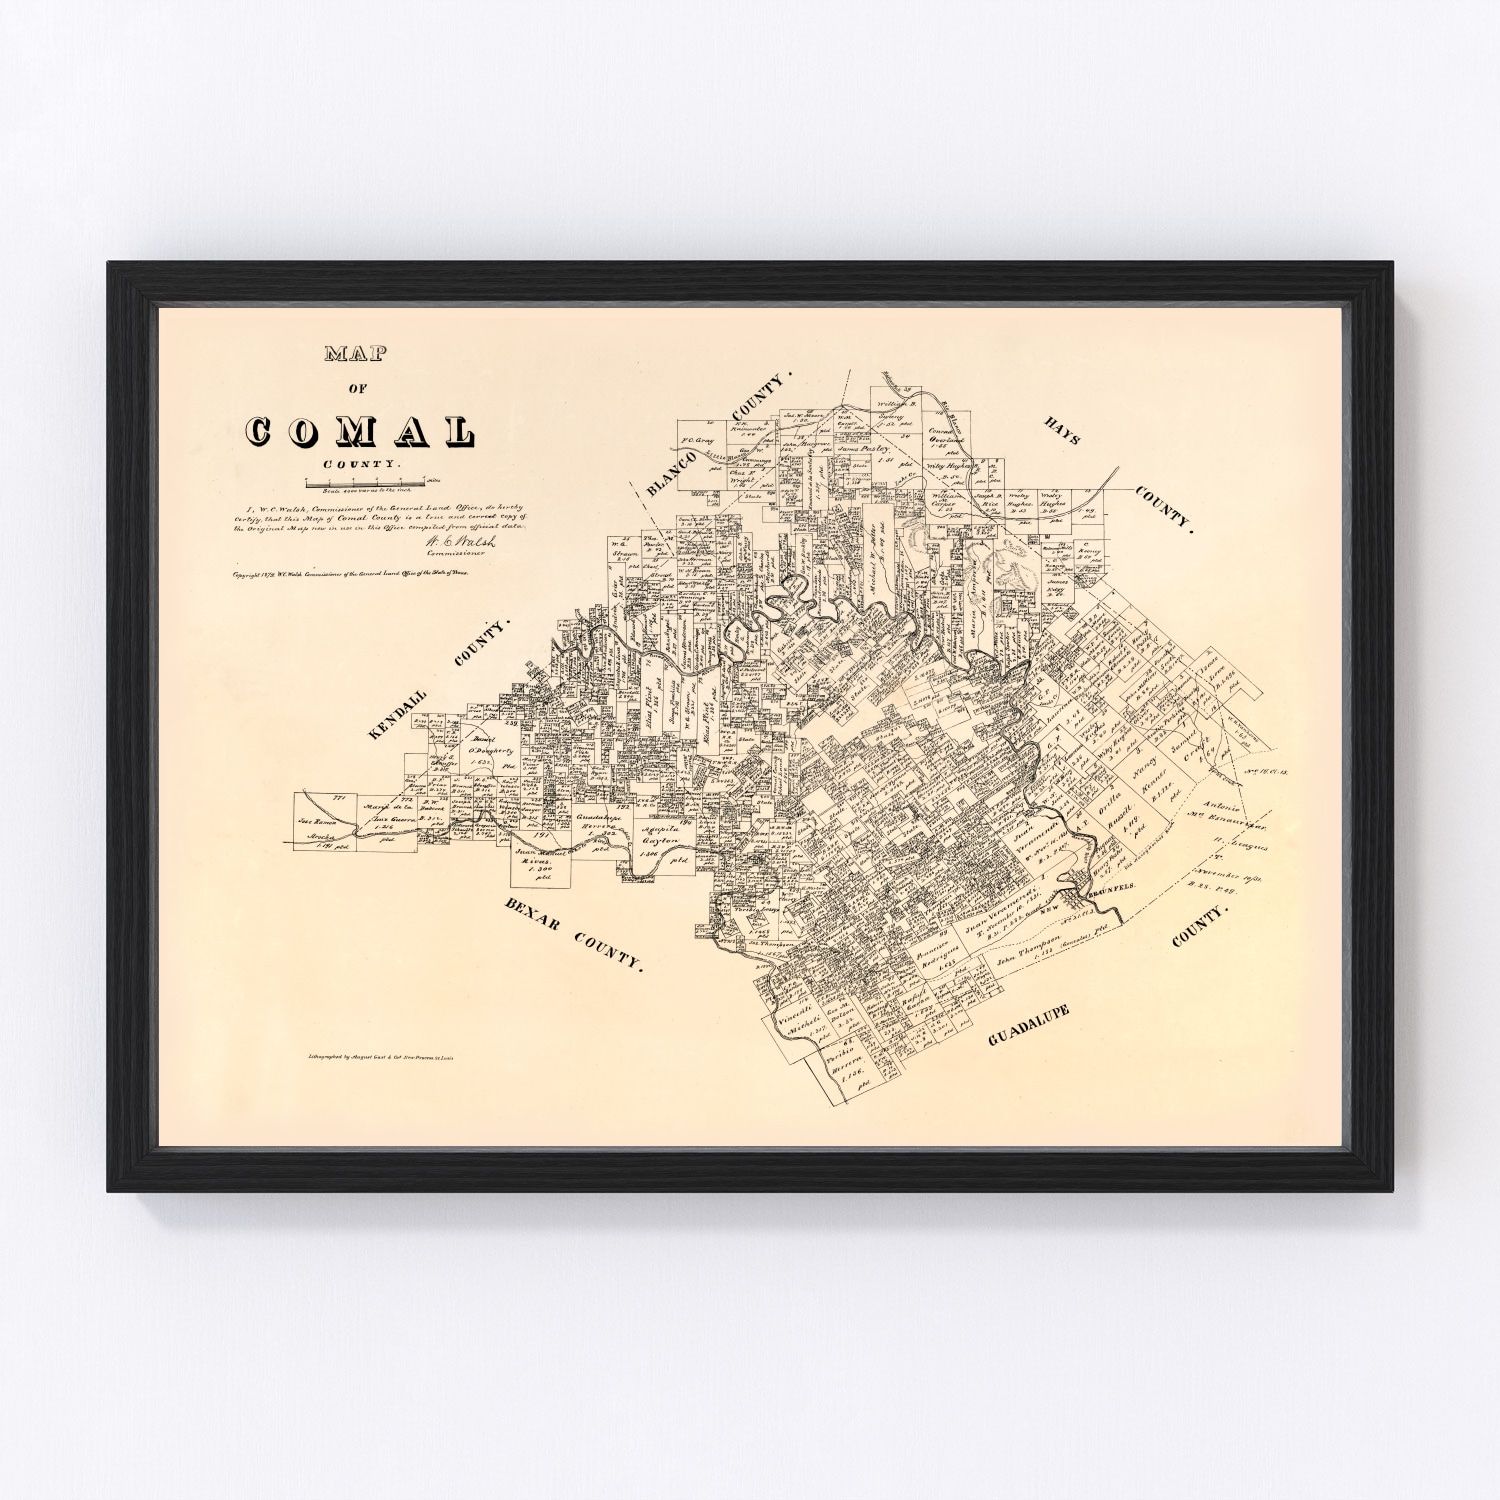 Vintage Map Of Comal County Texas 1879 By Teds Vintage Art 0113